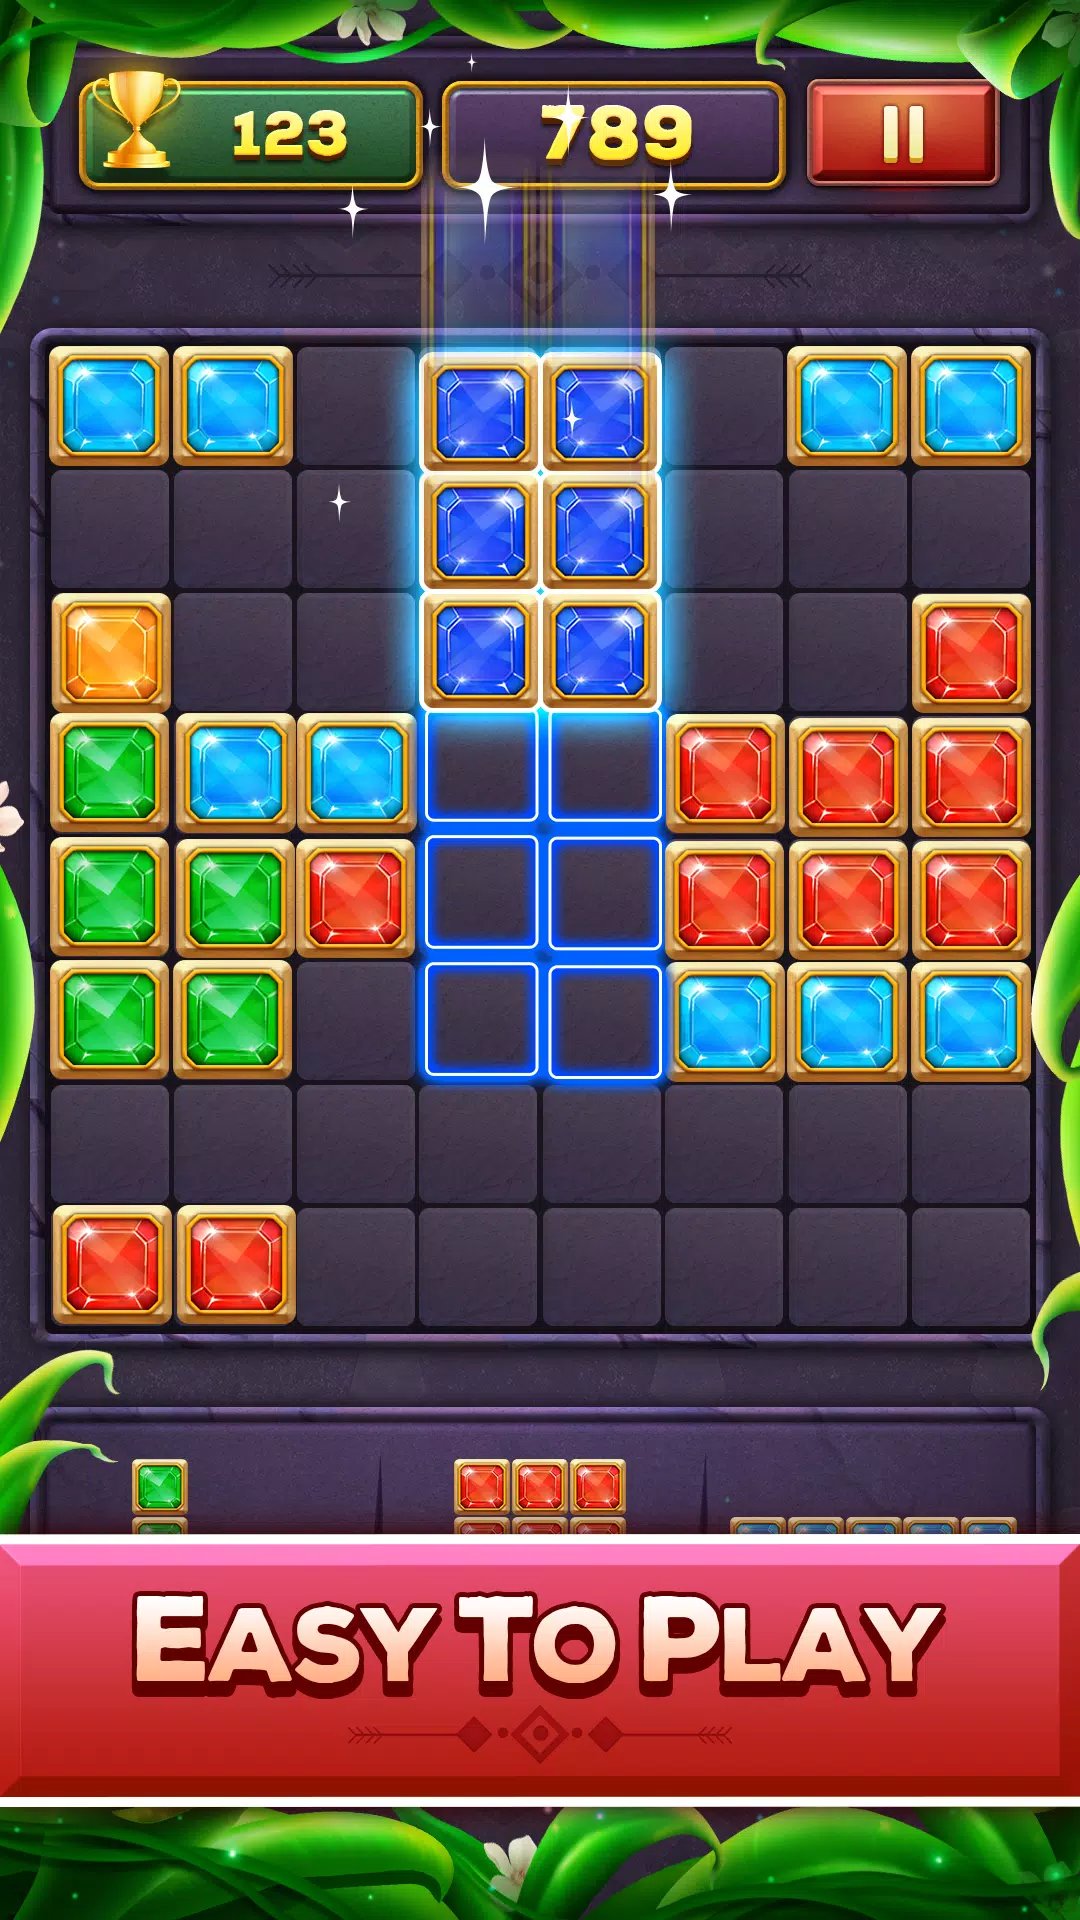 Block Puzzle Classic Plus Game for Android - Download